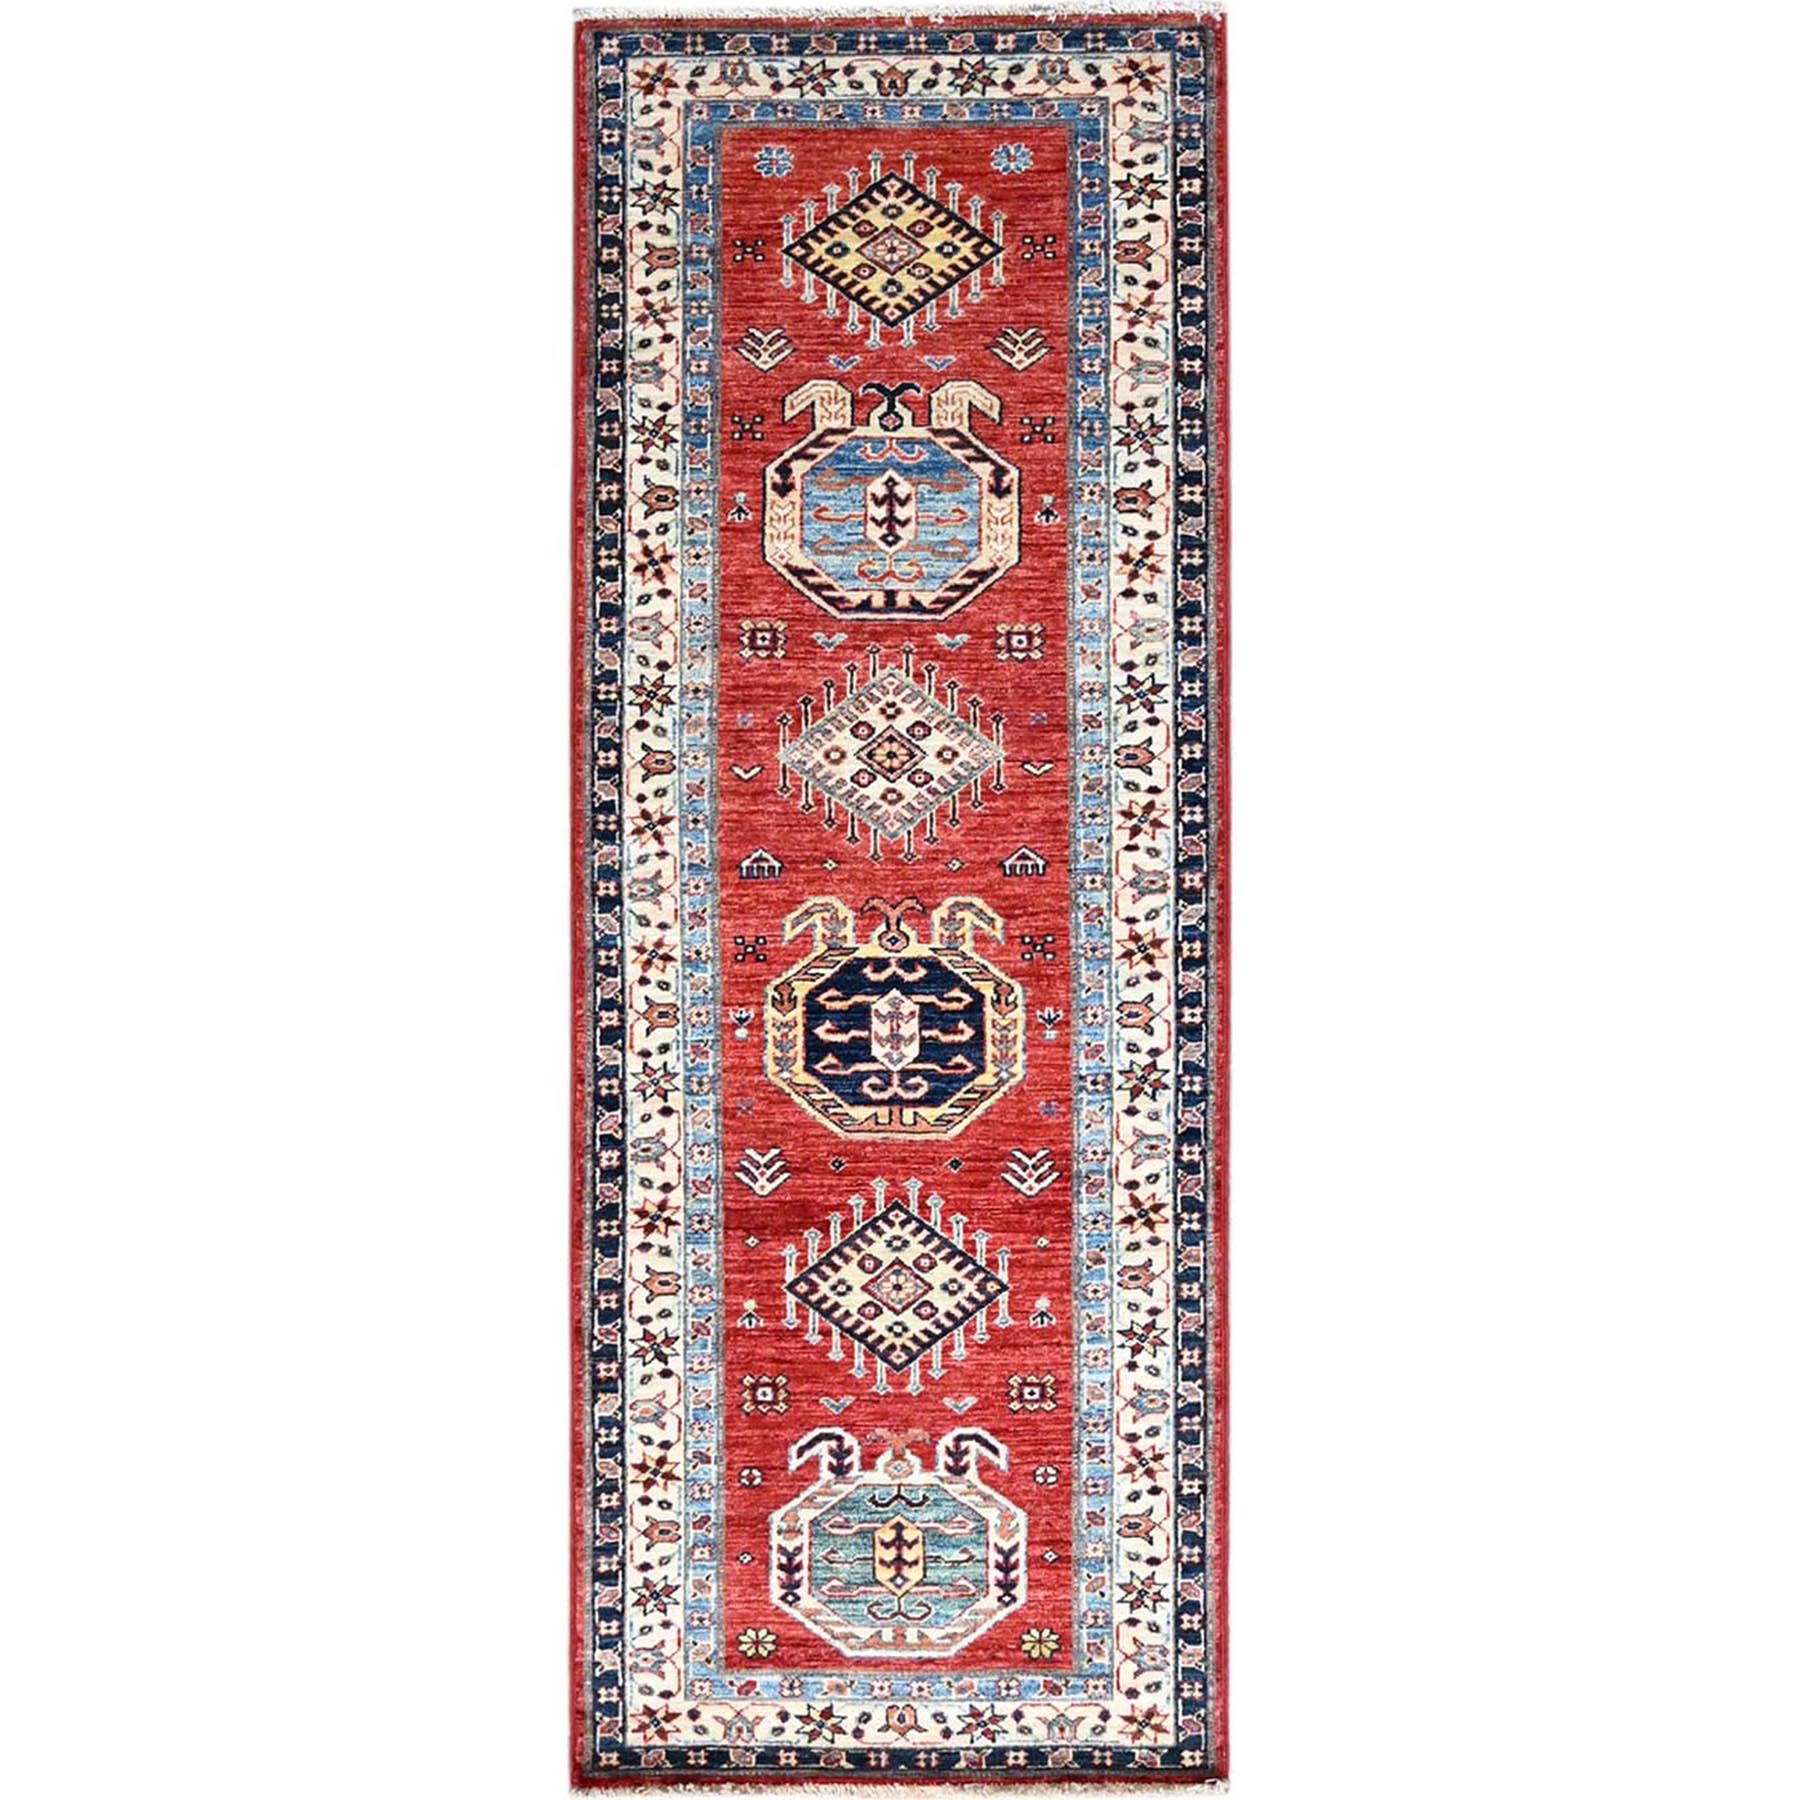 Currant Red, Dover White Border, Vegetable Dyes Afghan Super Kazak with Geometric Design Densely Woven, Pure Wool Hand Knotted Runner Oriental Rug